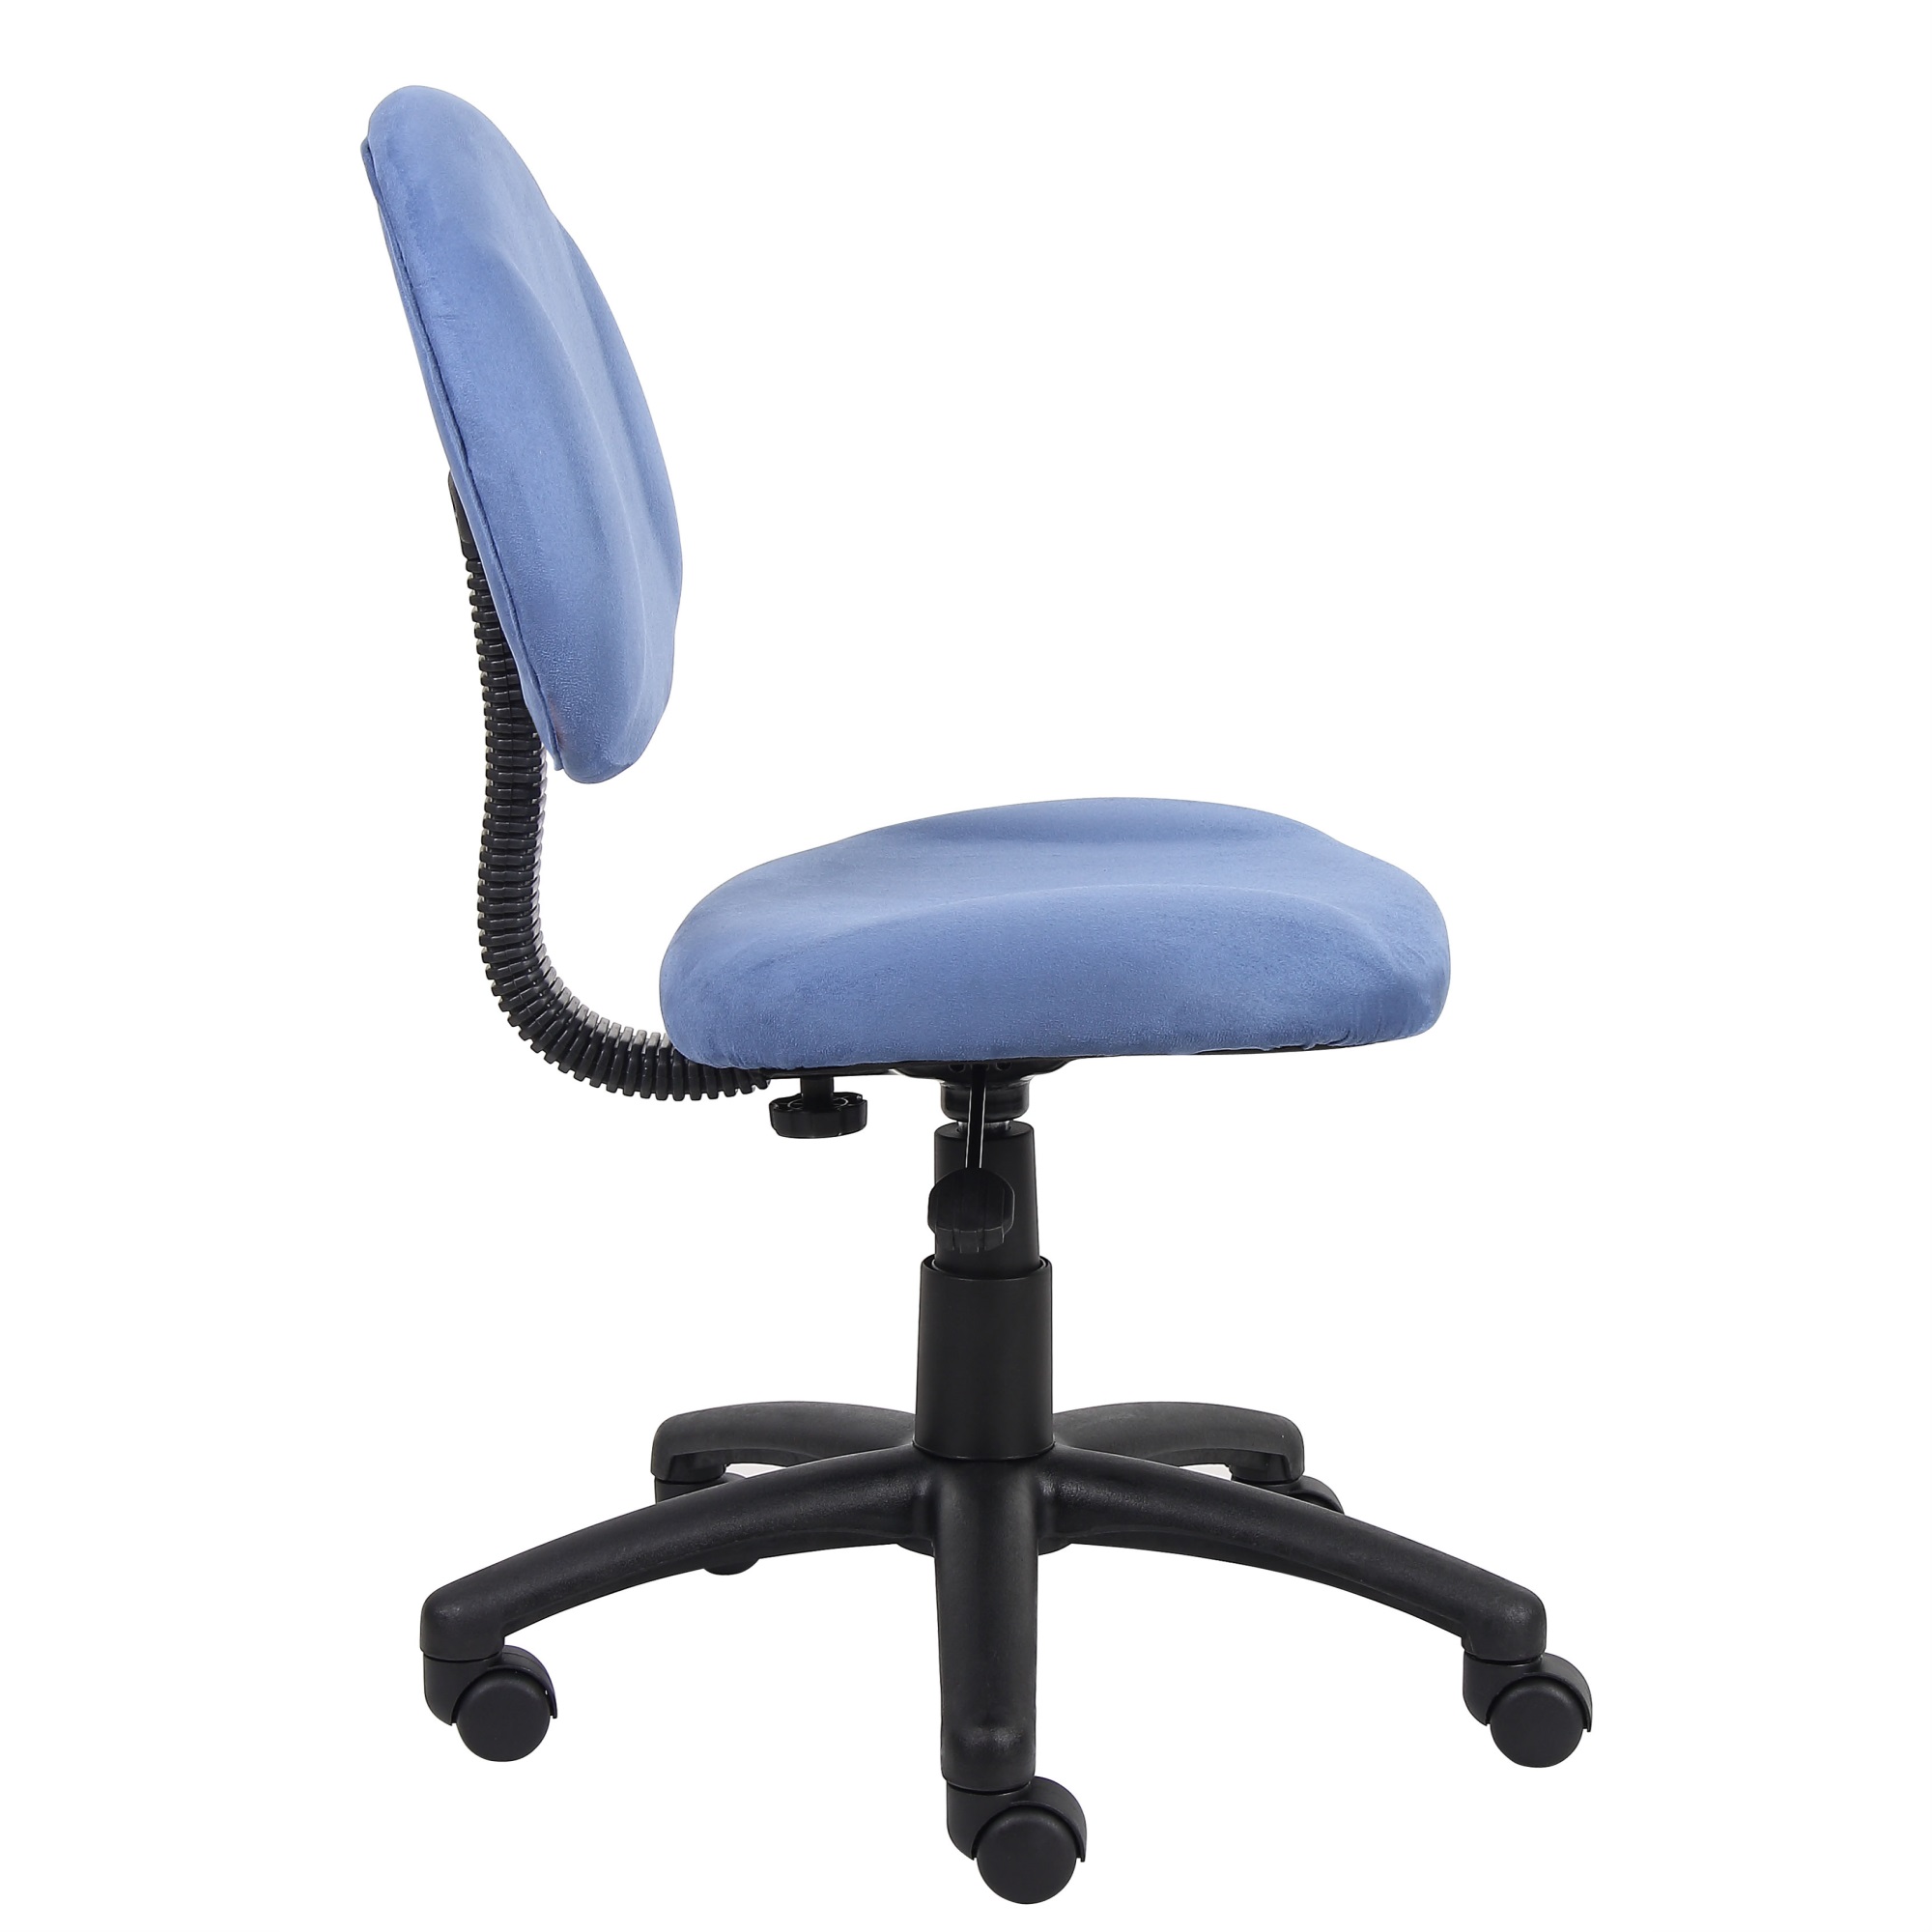 Boss Office Products B325-BE Perfect Posture Deluxe Modern Home Office Chair without Arms, Blue - image 4 of 6